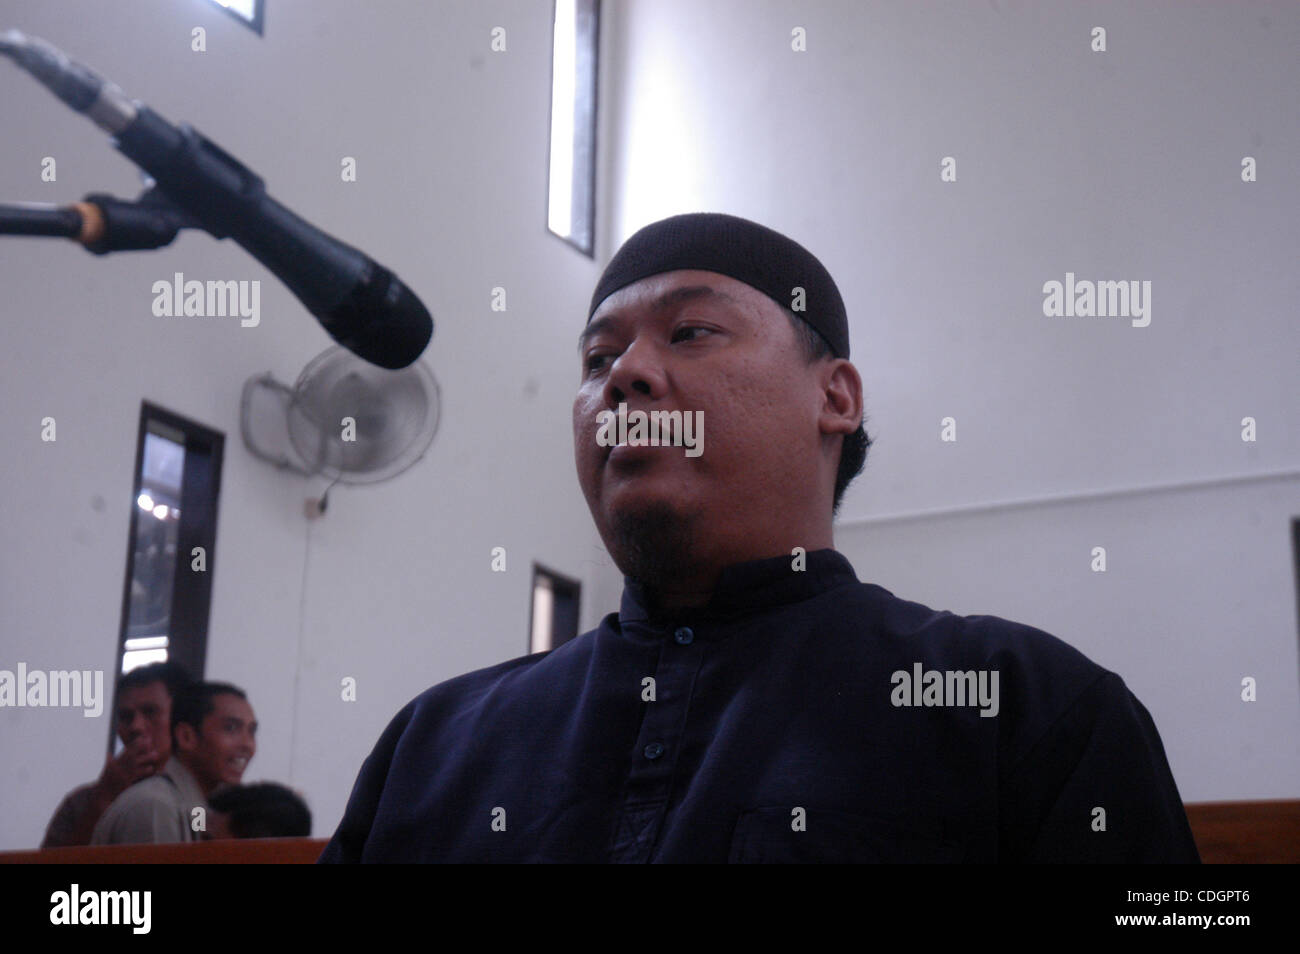 Mohammed Sofyan Tsauri, an Indonesian police officer who quit the force to become a terrorist, listens as judges read their verdict at Depok-West Java court, January 19, 2011. The court sentenced Tsauri, who was affiliated to Al-Qaeda and had trained about 170 militants to wage jihad (holy war), to  Stock Photo